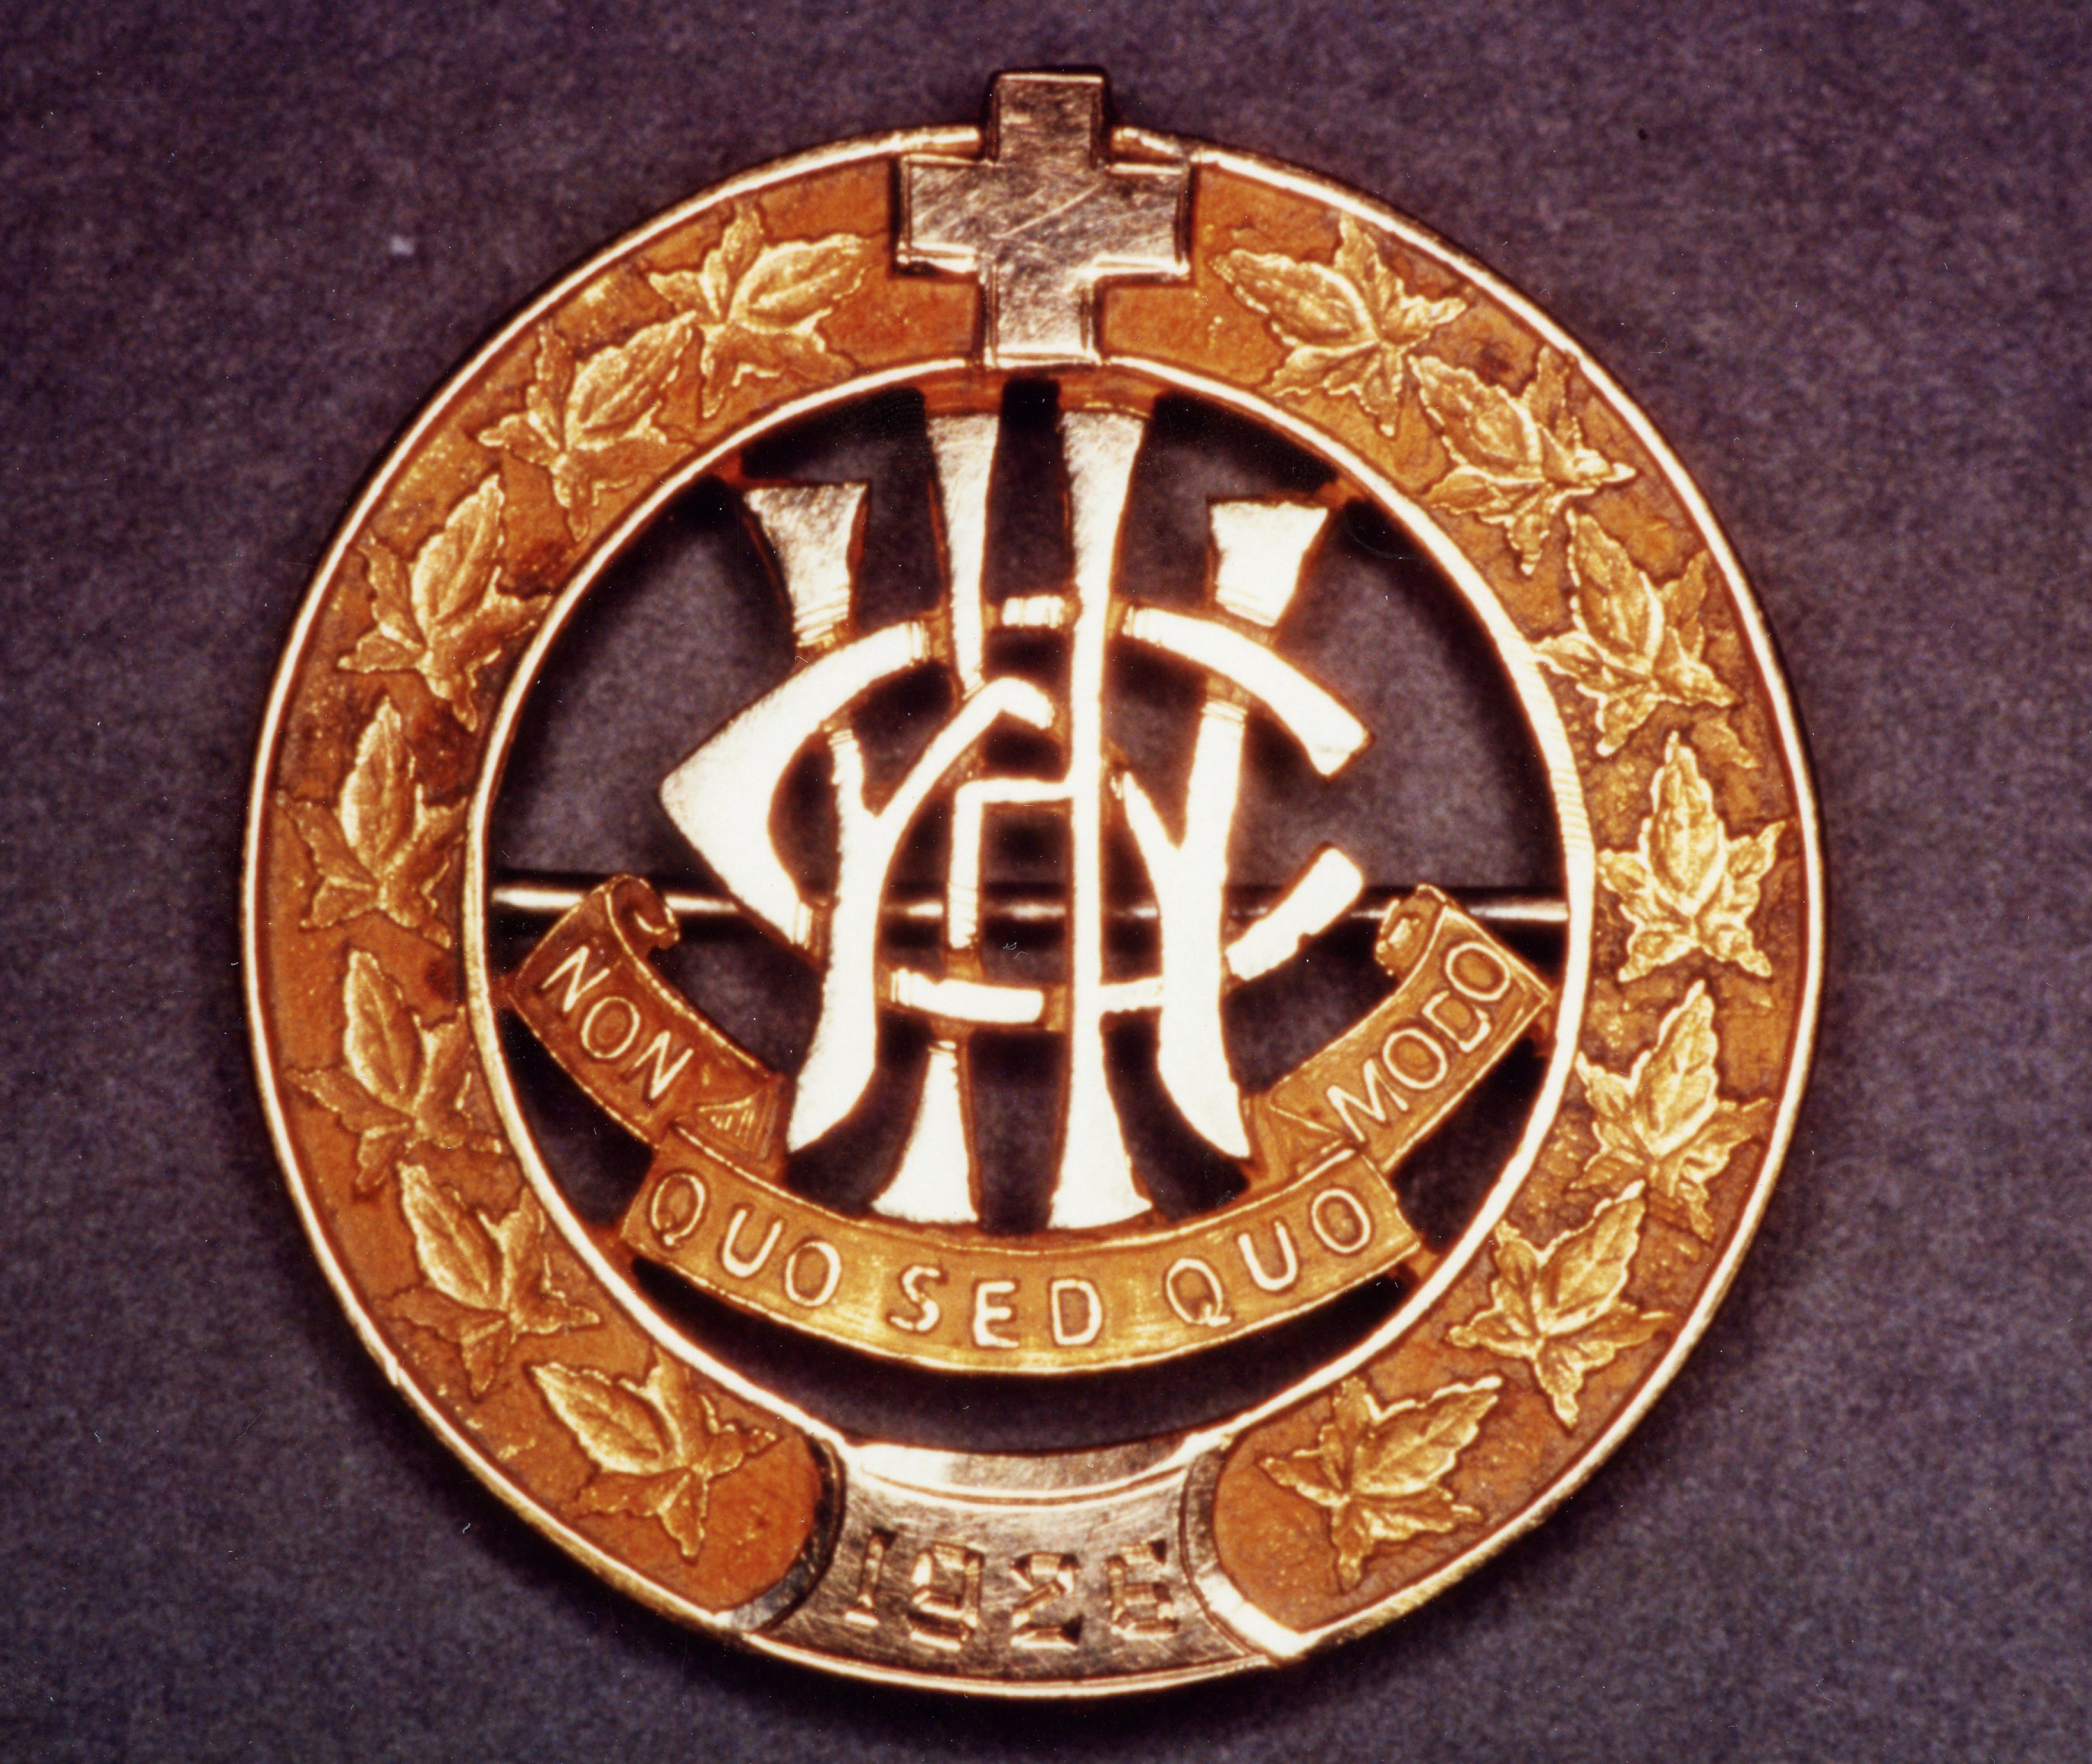 Circular pin, outlined by leaves, topped with a cross. The letters W, C, H, are entwined above the motto.